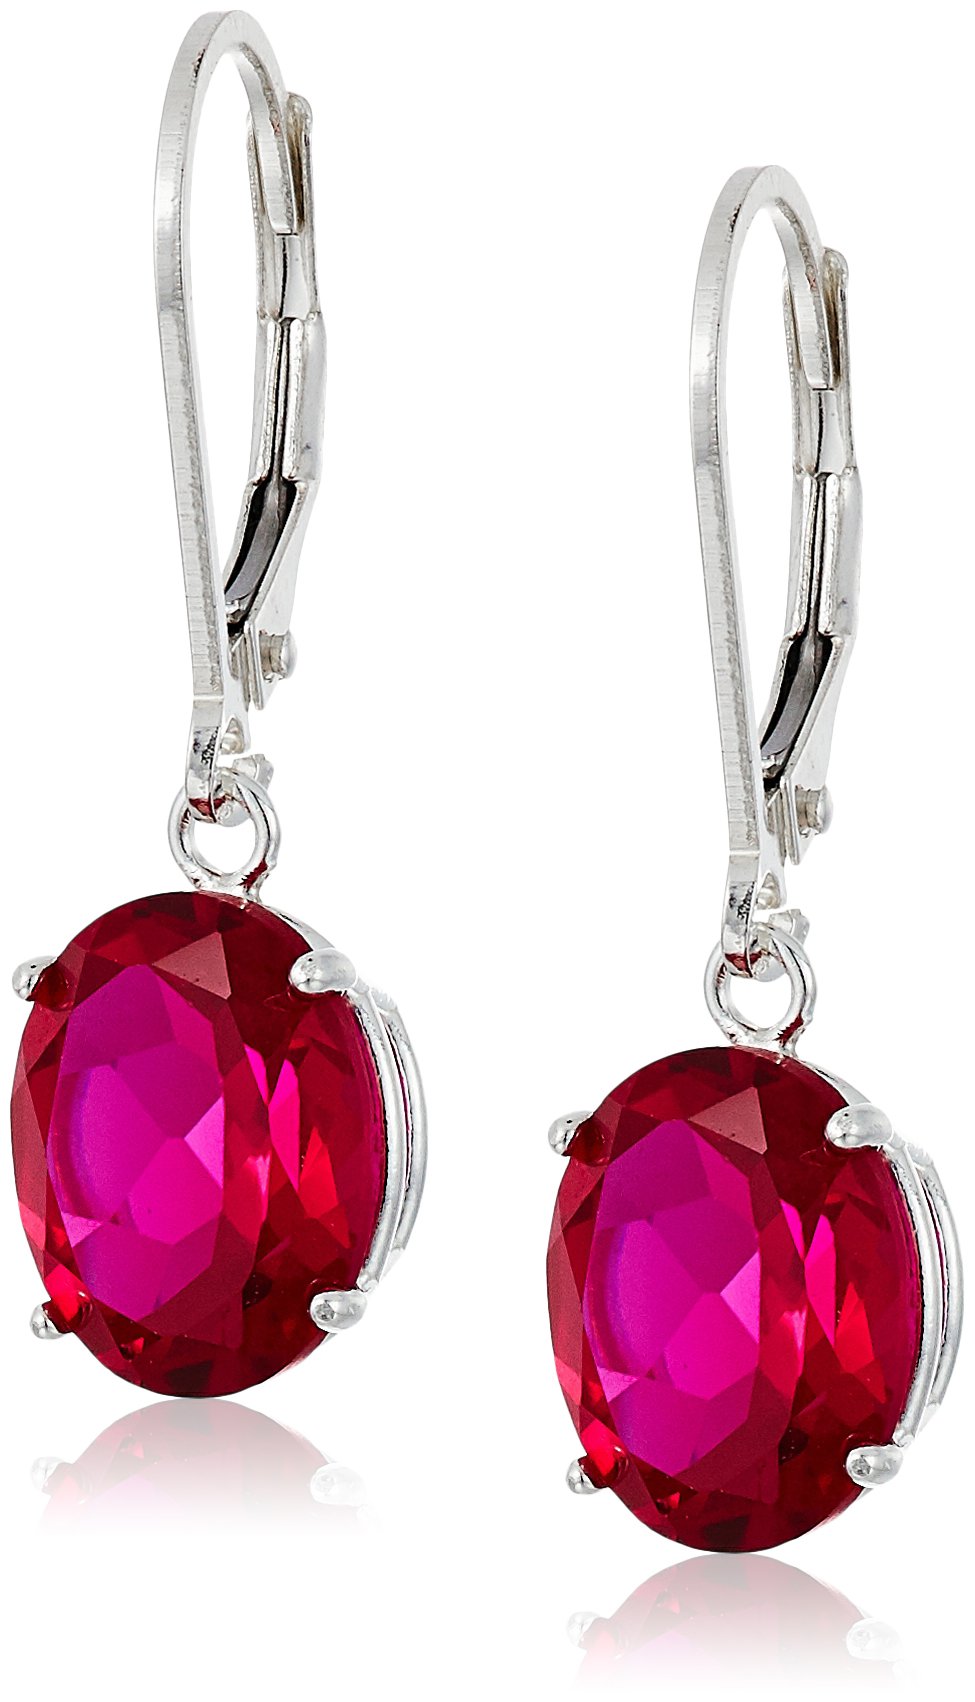 Amazon Collection 925 Sterling Silver 8 x 10mm Oval Birthstone Dangle Earrings for Women with Leverbacks